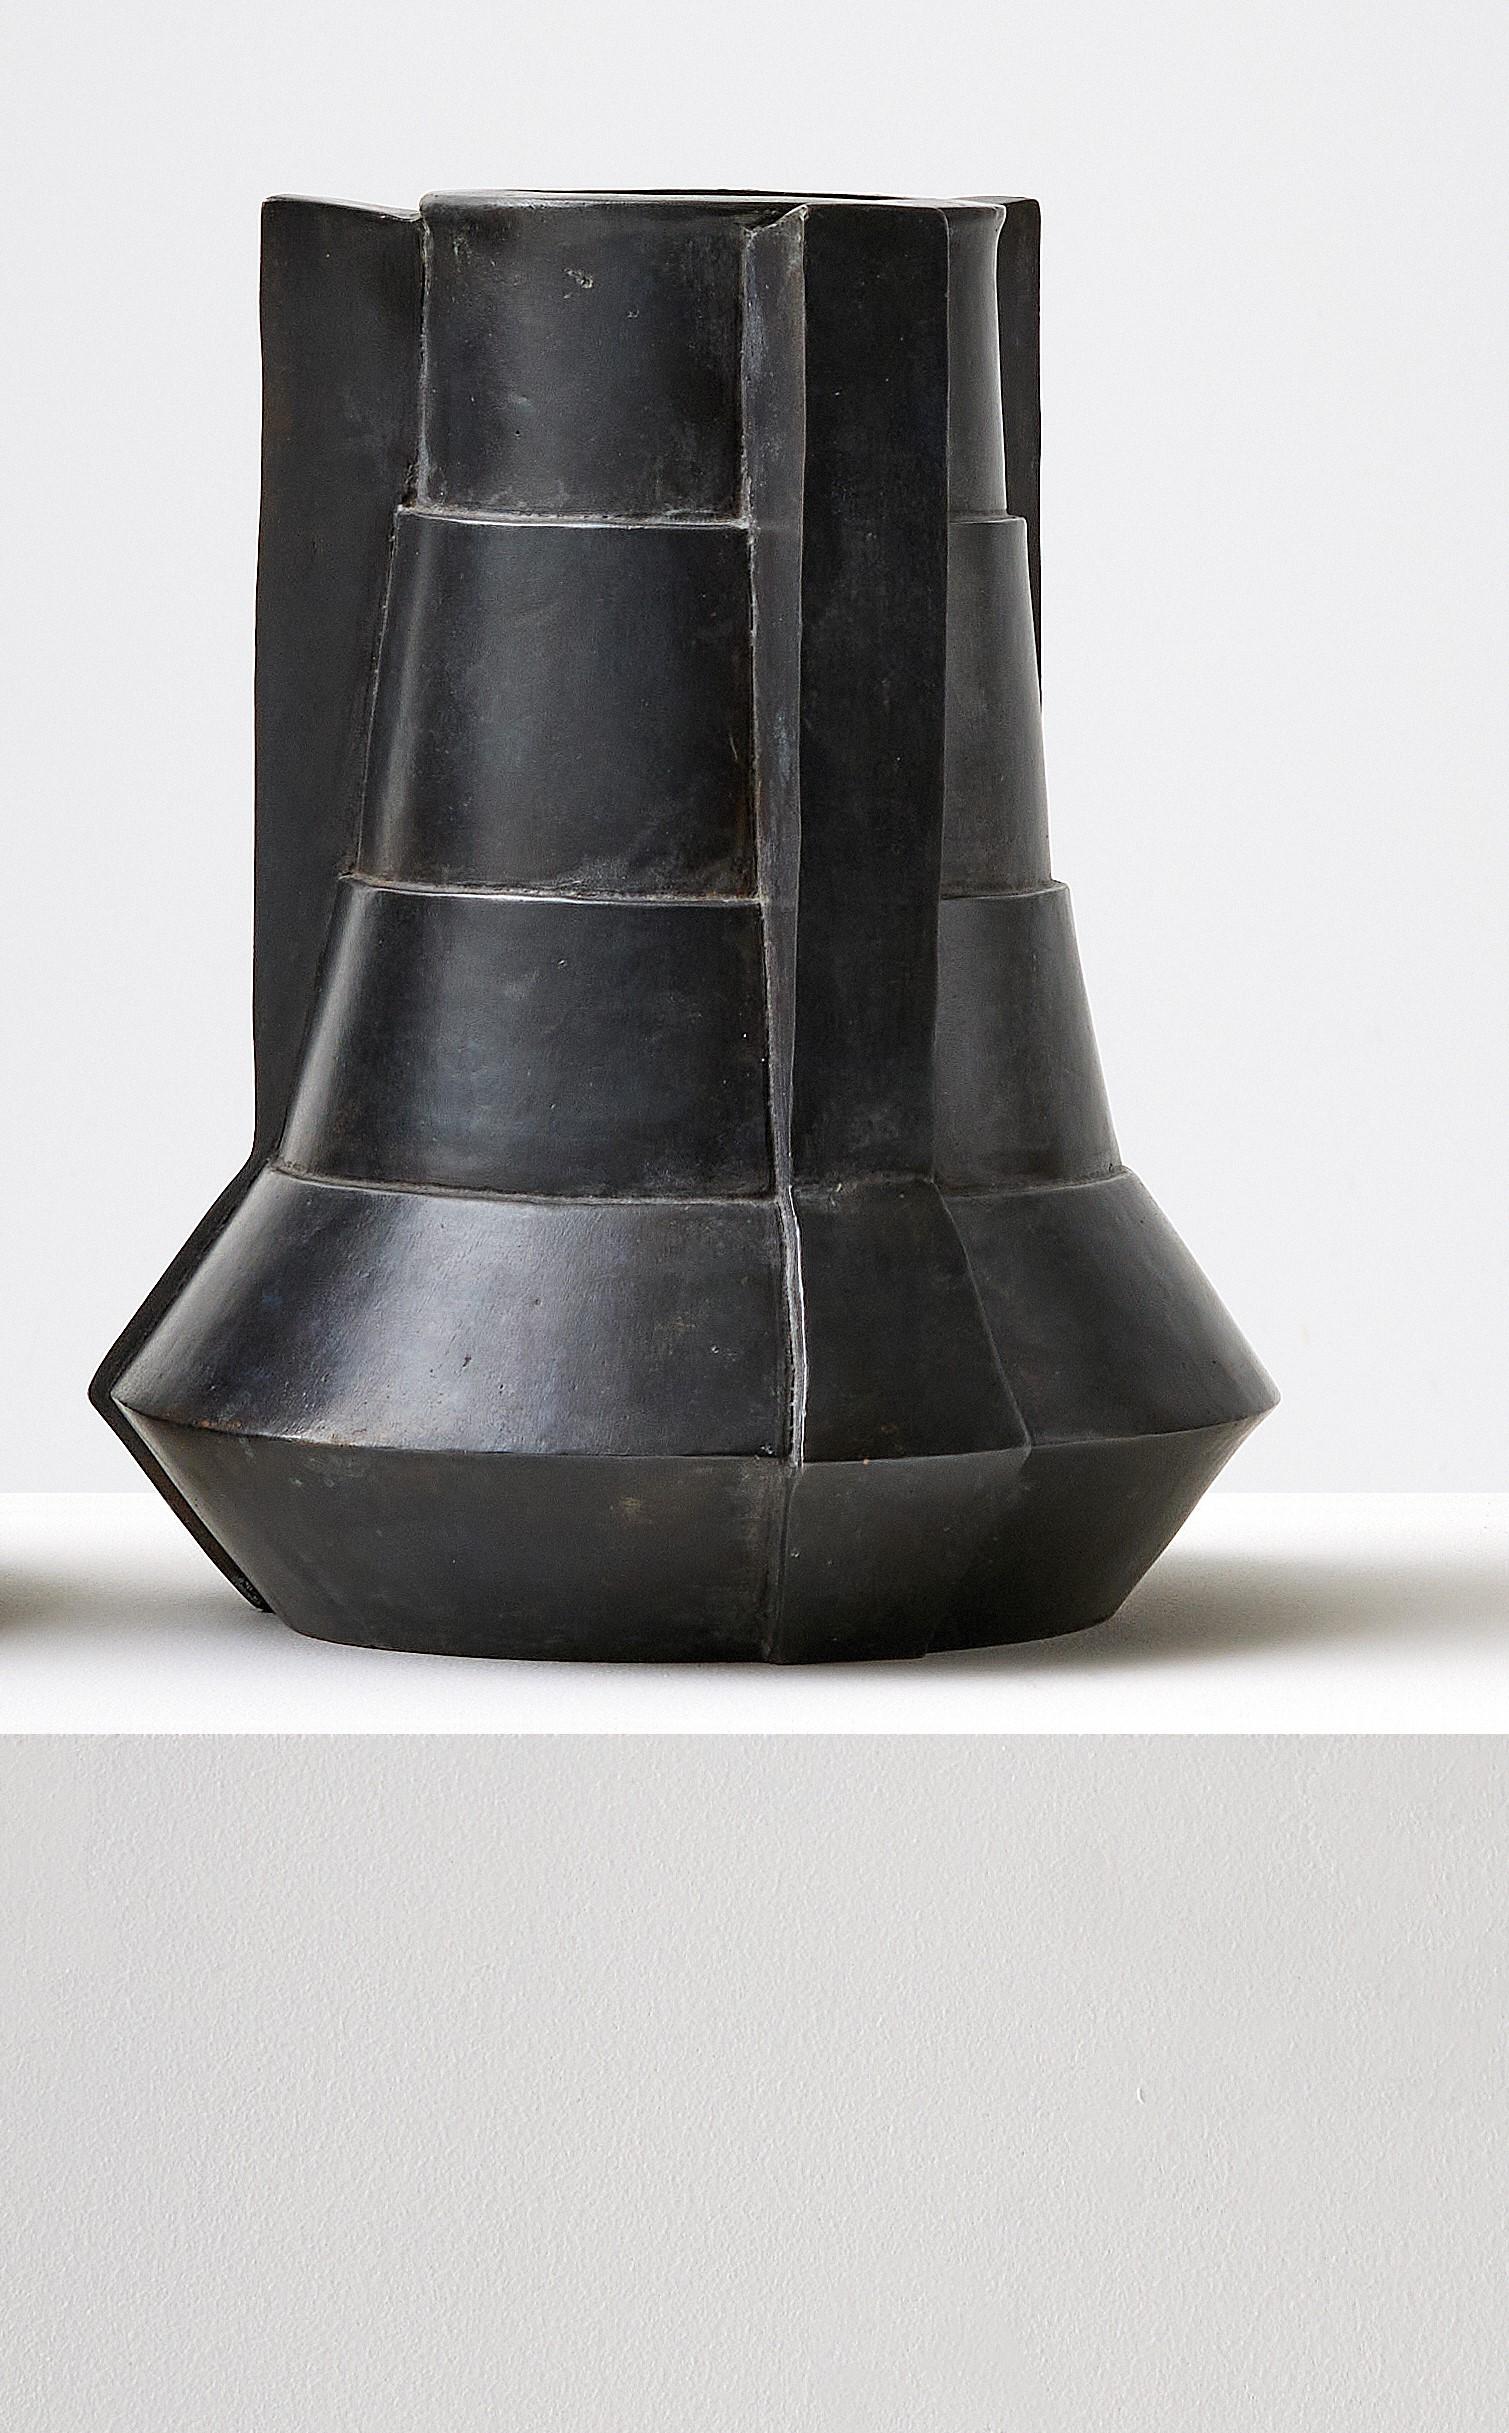 Bronze vase by Lupo Horio¯kami
Dimensions: Diameter 20 x height 30 cm
Materials: Bronze black acid

“The artwork [...] arises when the mind is willing to accept reality as it was the first time it meets it” (“aesthetics of the void”, g.